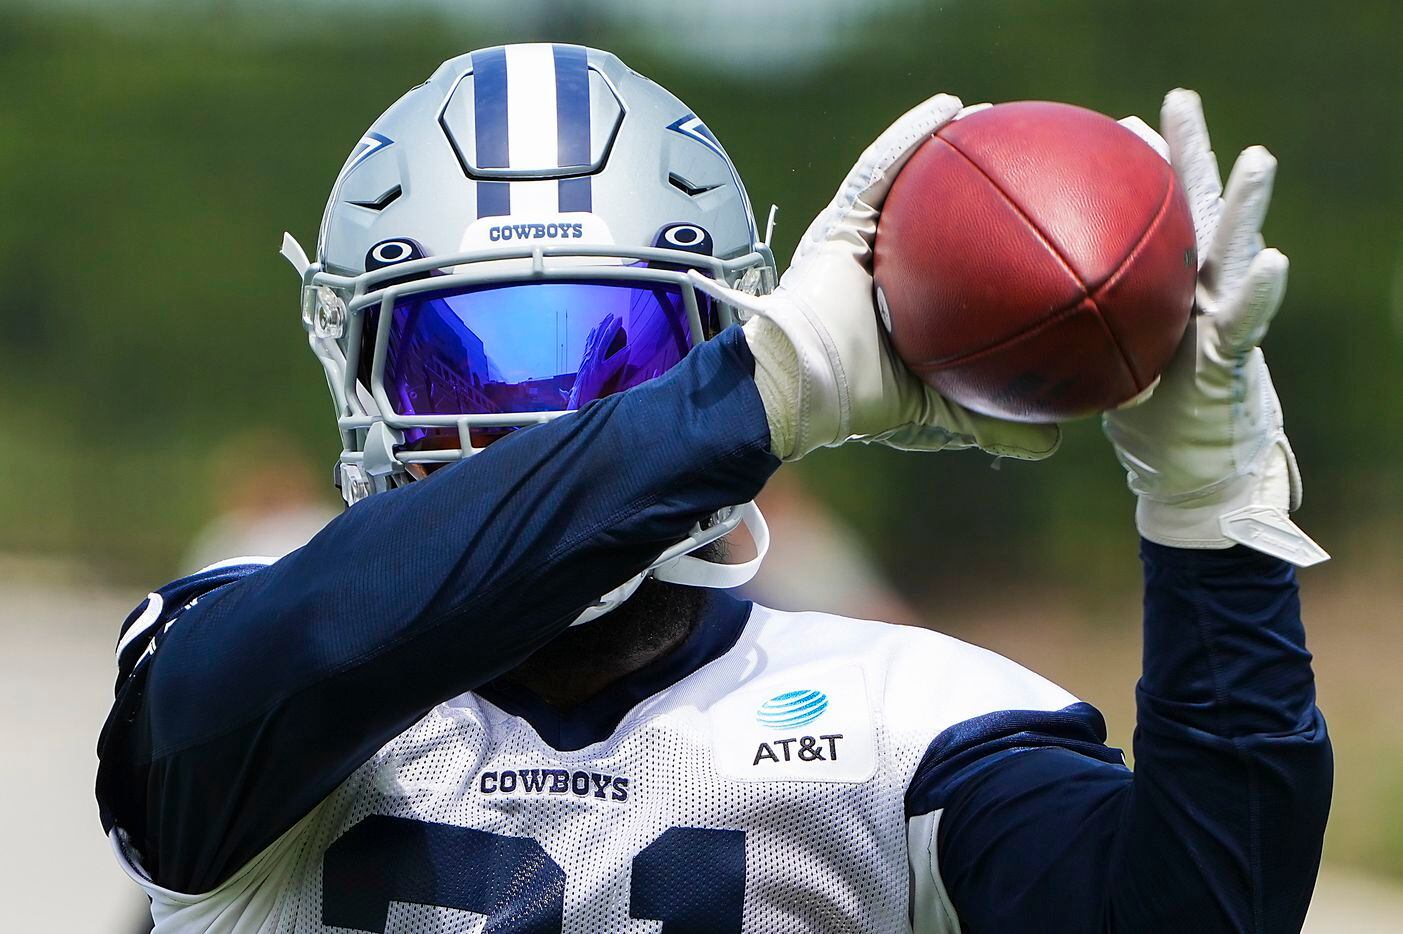 Dallas Cowboys running back Ezekiel Elliott catches a pass during a minicamp practice at The Star on Tuesday, June 8, 2021, in Frisco. (Smiley N. Pool/The Dallas Morning News)